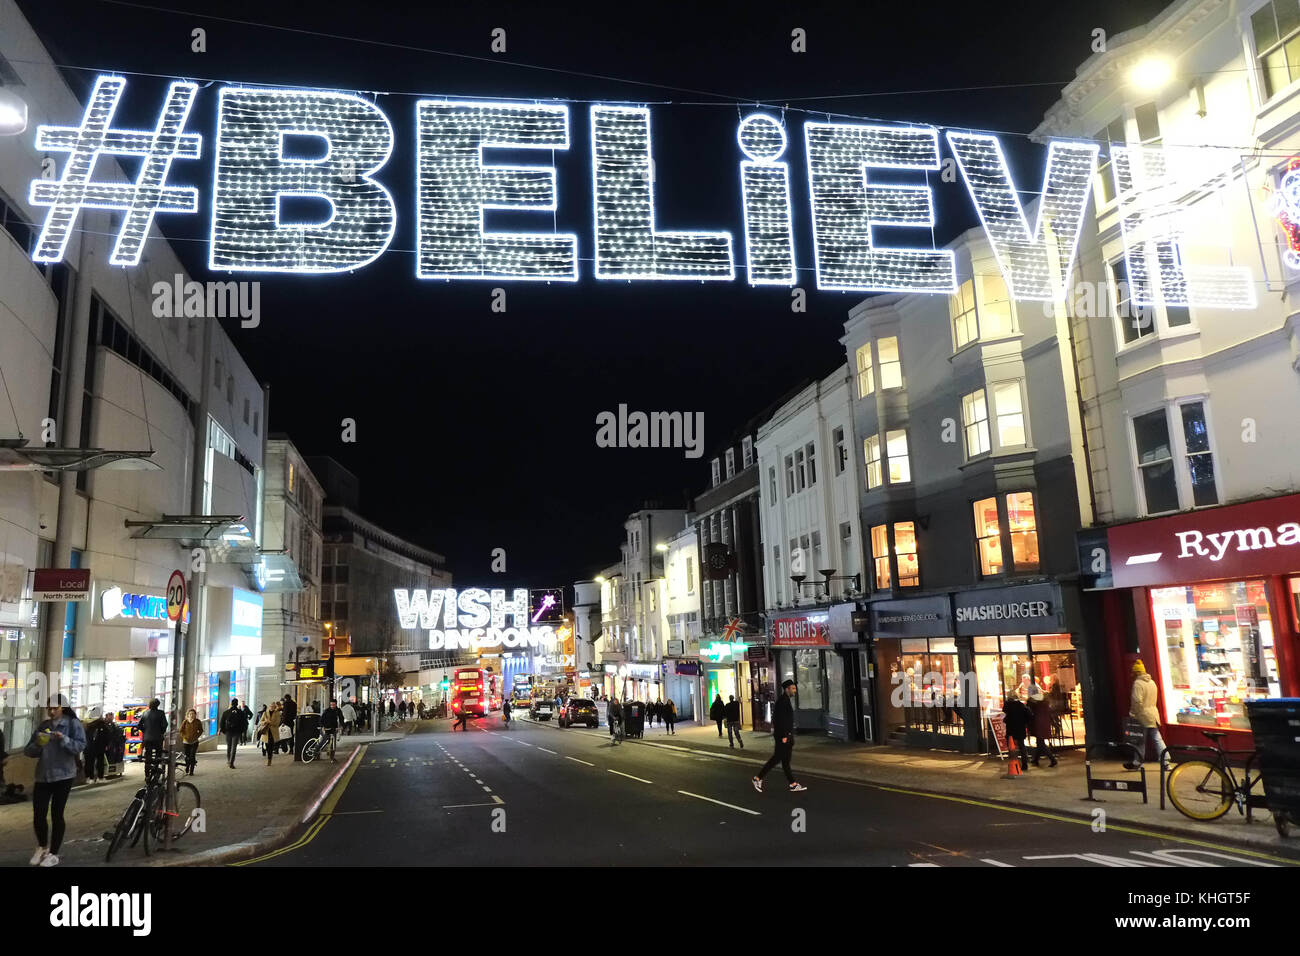 Brighton, UK. 17th November 2017. The Christmas shopping season is underway in Brighton East Sussex with the festive lights switched on with yuletide words in lights strung across North Street in the city. Credit: Nigel Bowles/Alamy Live News Stock Photo